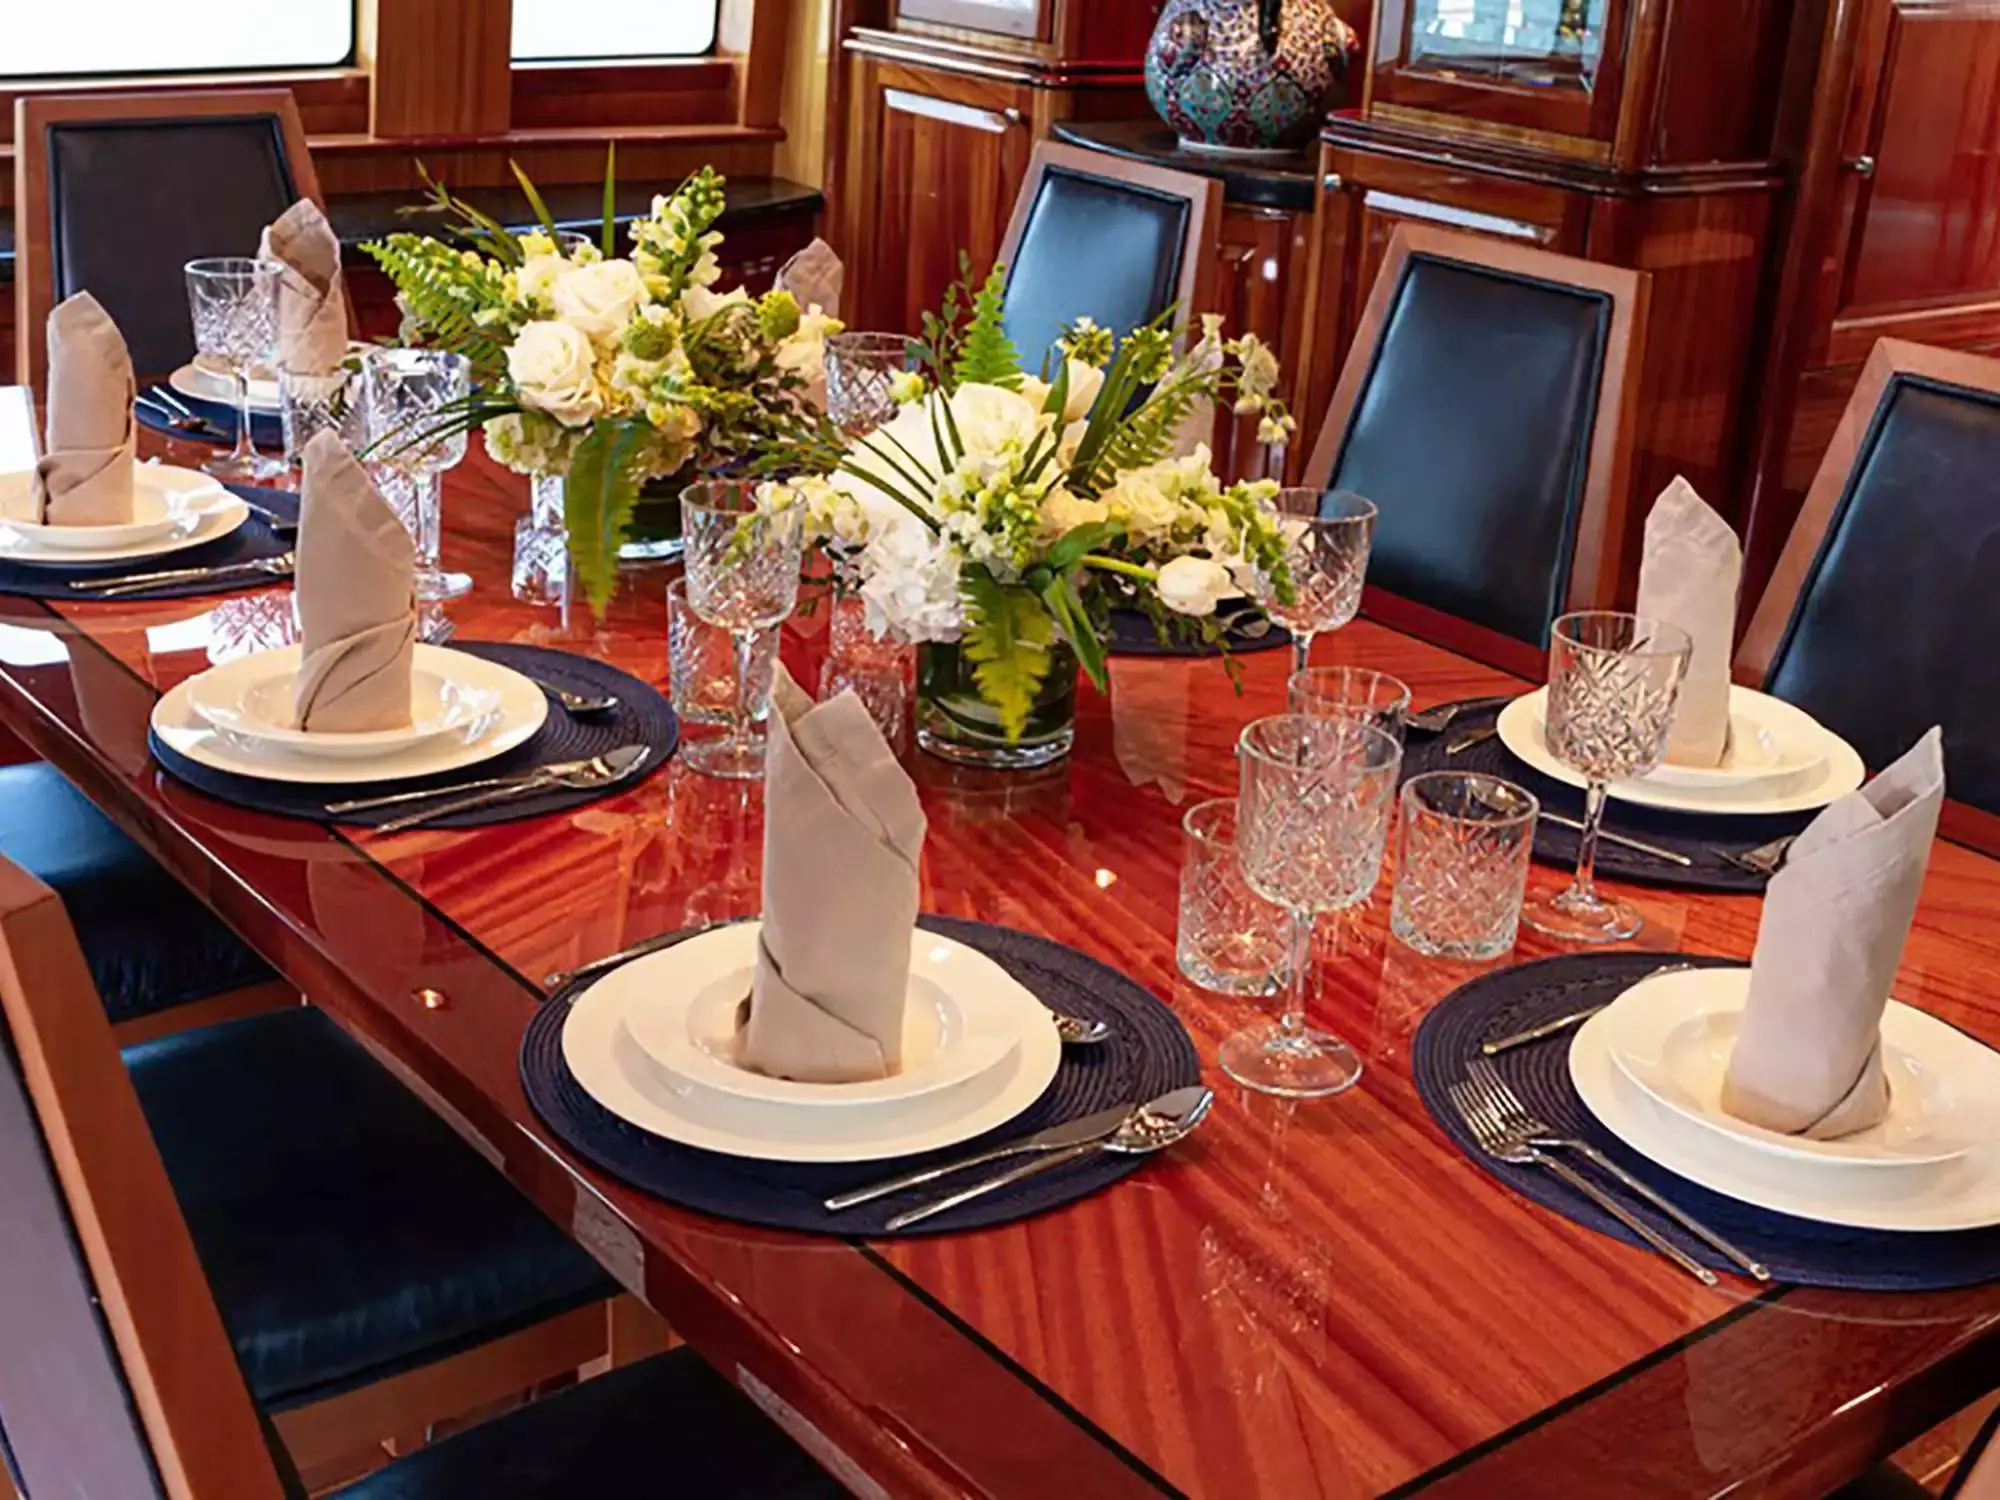 TopShelf by Hatteras - Top rates for a Charter of a private Motor Yacht in St Lucia